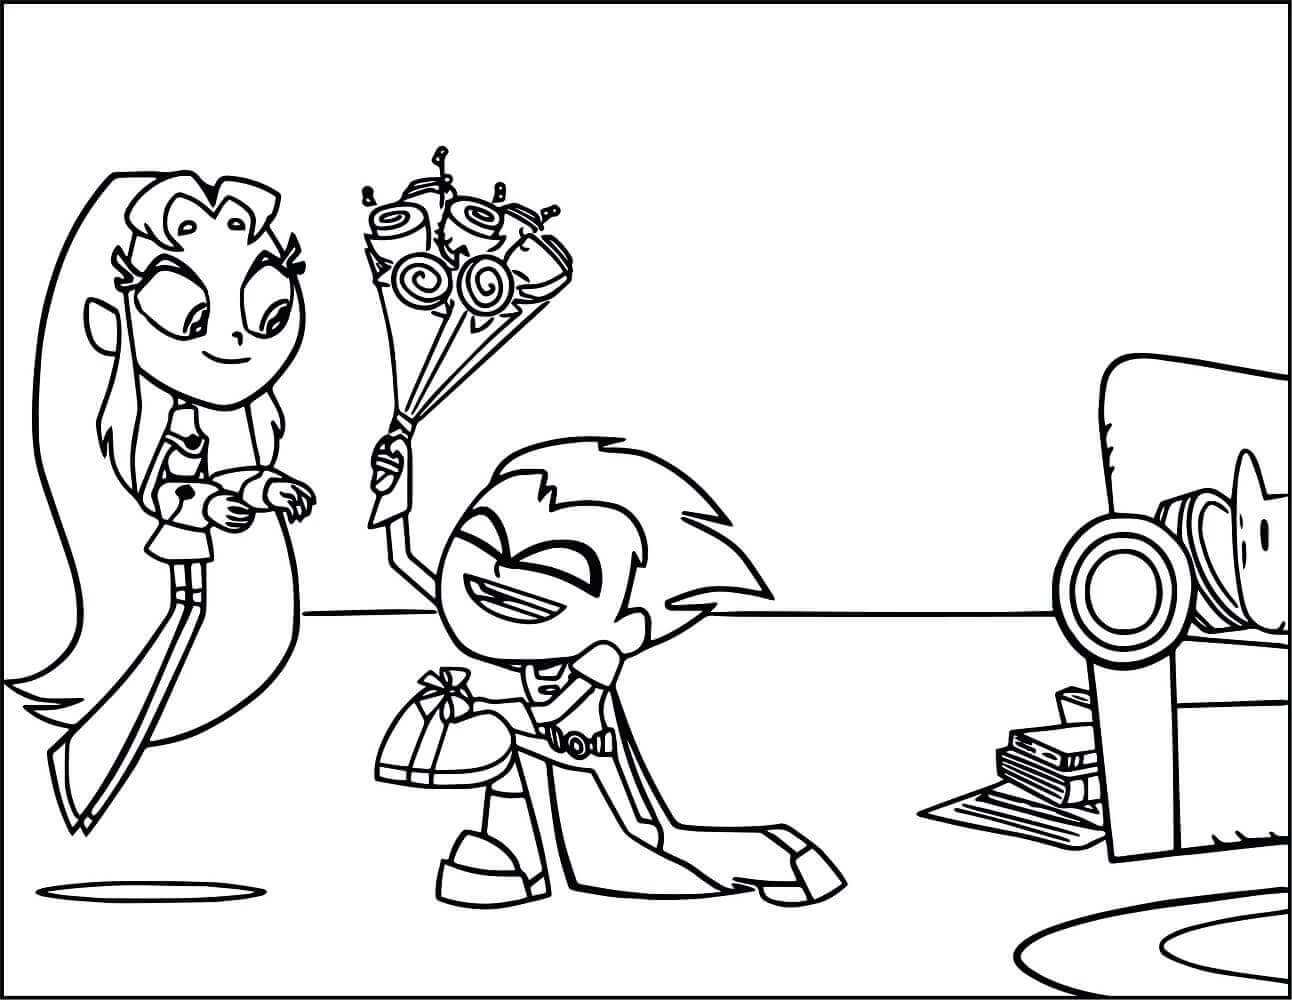 Teen Titans Go Coloring Pages
 10 Free Printable Teen Titans Go Coloring Pages